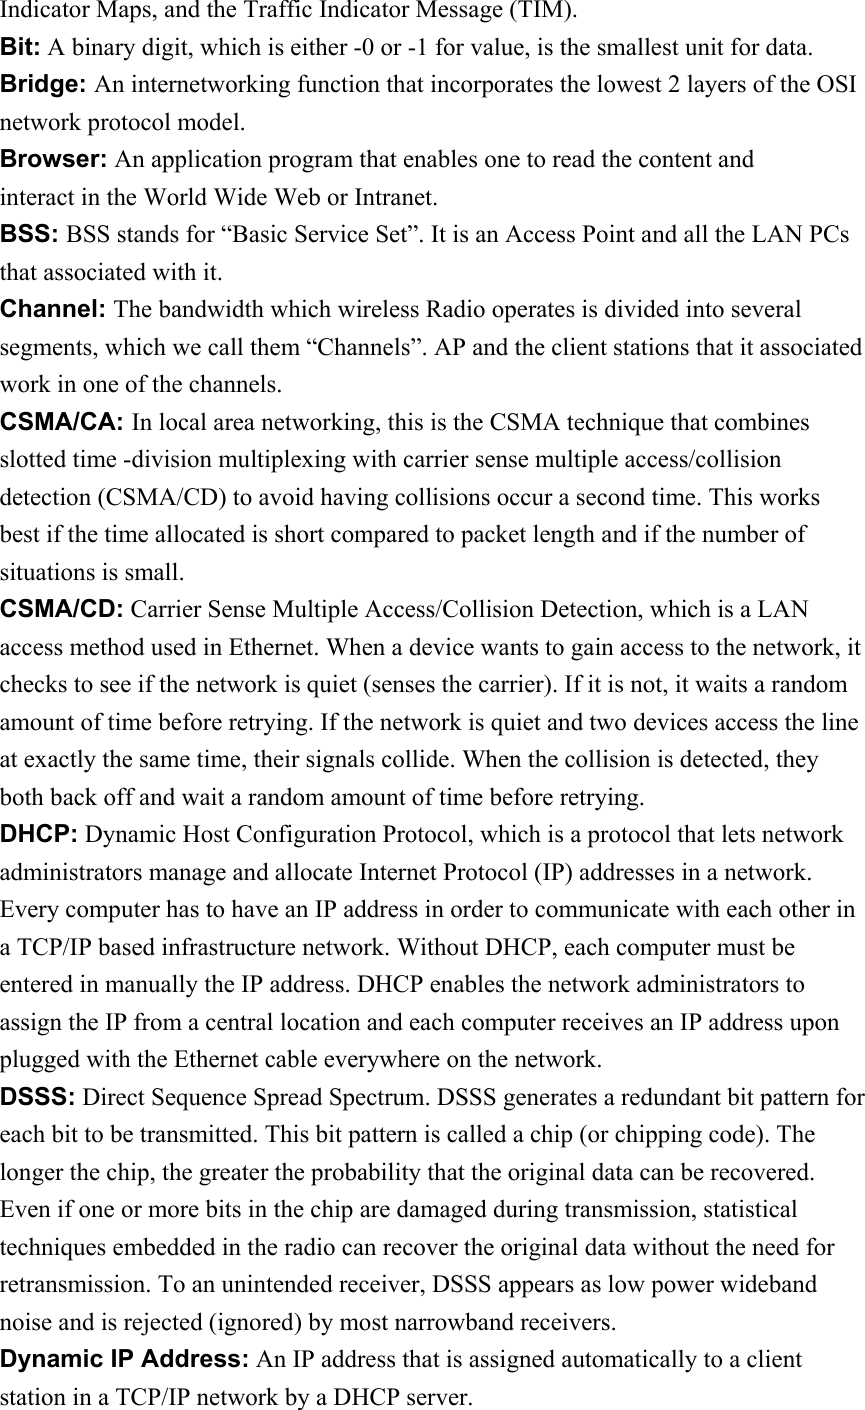 Indicator Maps, and the Traffic Indicator Message (TIM). Bit: A binary digit, which is either -0 or -1 for value, is the smallest unit for data. Bridge: An internetworking function that incorporates the lowest 2 layers of the OSI network protocol model. Browser: An application program that enables one to read the content and interact in the World Wide Web or Intranet. BSS: BSS stands for “Basic Service Set”. It is an Access Point and all the LAN PCs that associated with it. Channel: The bandwidth which wireless Radio operates is divided into several segments, which we call them “Channels”. AP and the client stations that it associated work in one of the channels. CSMA/CA: In local area networking, this is the CSMA technique that combines slotted time -division multiplexing with carrier sense multiple access/collision detection (CSMA/CD) to avoid having collisions occur a second time. This works best if the time allocated is short compared to packet length and if the number of situations is small. CSMA/CD: Carrier Sense Multiple Access/Collision Detection, which is a LAN access method used in Ethernet. When a device wants to gain access to the network, it checks to see if the network is quiet (senses the carrier). If it is not, it waits a random amount of time before retrying. If the network is quiet and two devices access the line at exactly the same time, their signals collide. When the collision is detected, they both back off and wait a random amount of time before retrying. DHCP: Dynamic Host Configuration Protocol, which is a protocol that lets network administrators manage and allocate Internet Protocol (IP) addresses in a network.   Every computer has to have an IP address in order to communicate with each other in a TCP/IP based infrastructure network. Without DHCP, each computer must be entered in manually the IP address. DHCP enables the network administrators to assign the IP from a central location and each computer receives an IP address upon plugged with the Ethernet cable everywhere on the network. DSSS: Direct Sequence Spread Spectrum. DSSS generates a redundant bit pattern for each bit to be transmitted. This bit pattern is called a chip (or chipping code). The longer the chip, the greater the probability that the original data can be recovered. Even if one or more bits in the chip are damaged during transmission, statistical techniques embedded in the radio can recover the original data without the need for retransmission. To an unintended receiver, DSSS appears as low power wideband noise and is rejected (ignored) by most narrowband receivers. Dynamic IP Address: An IP address that is assigned automatically to a client station in a TCP/IP network by a DHCP server. 